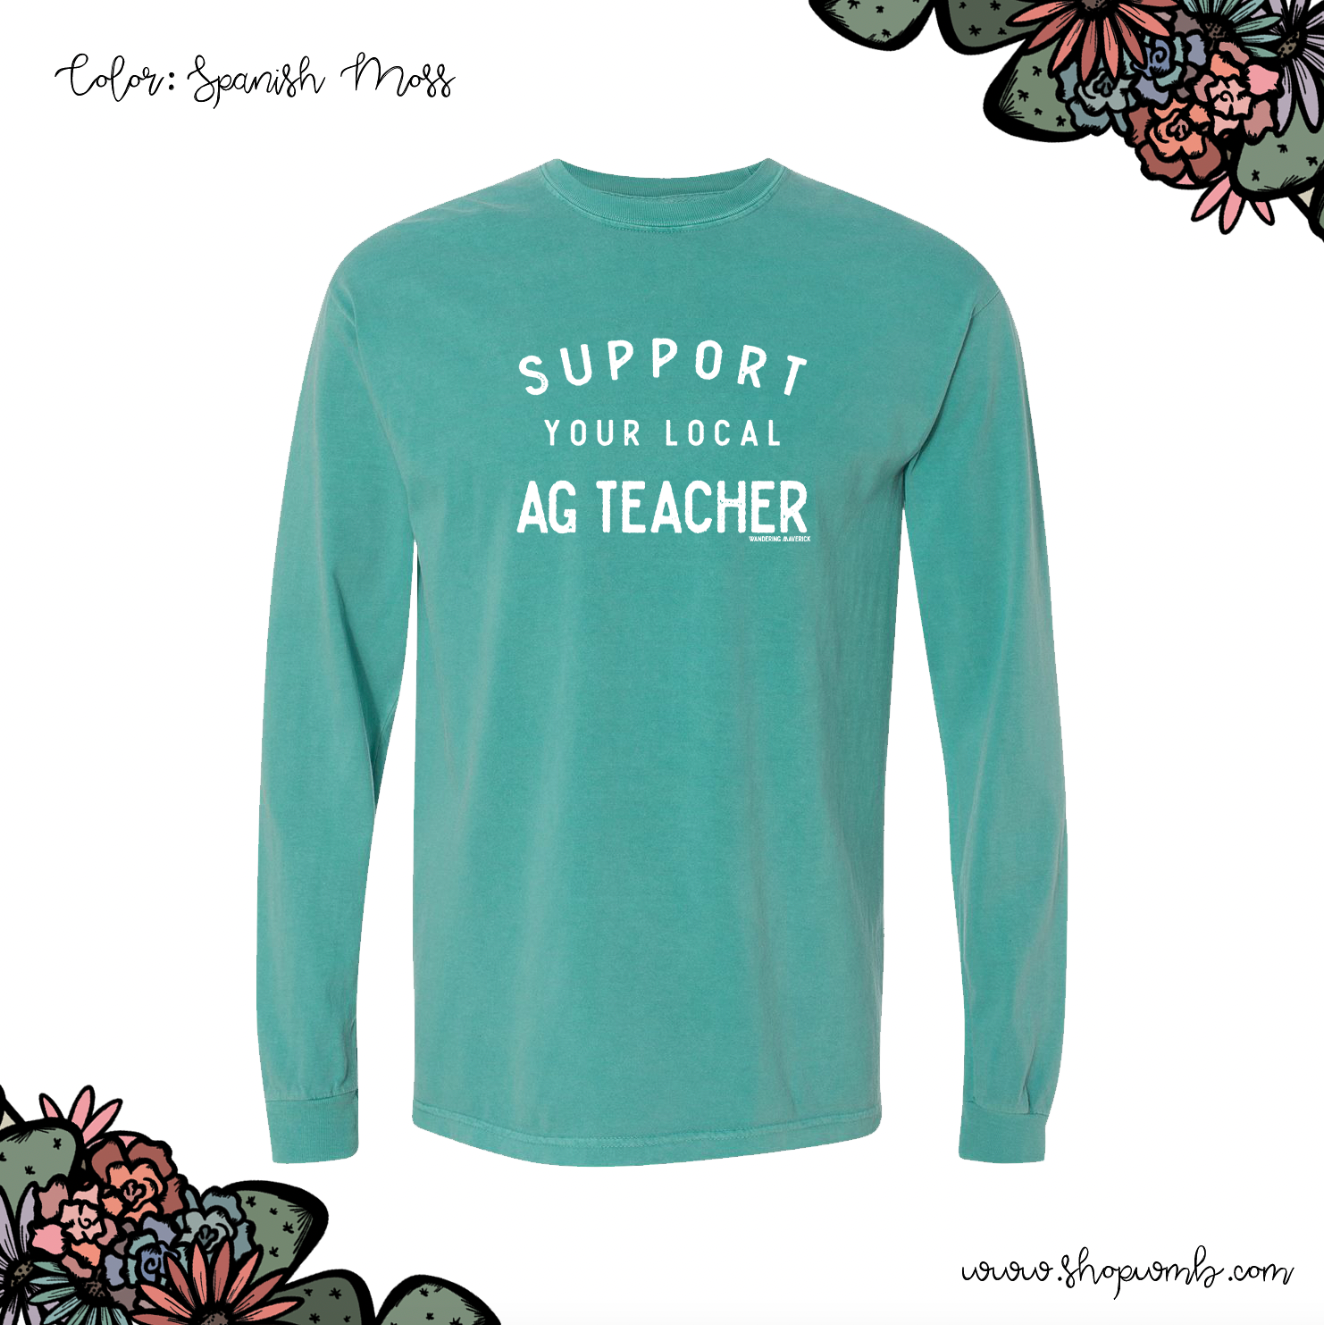 Support Your Local Ag Teacher White LONG SLEEVE T-Shirt (S-3XL) - Multiple Colors!